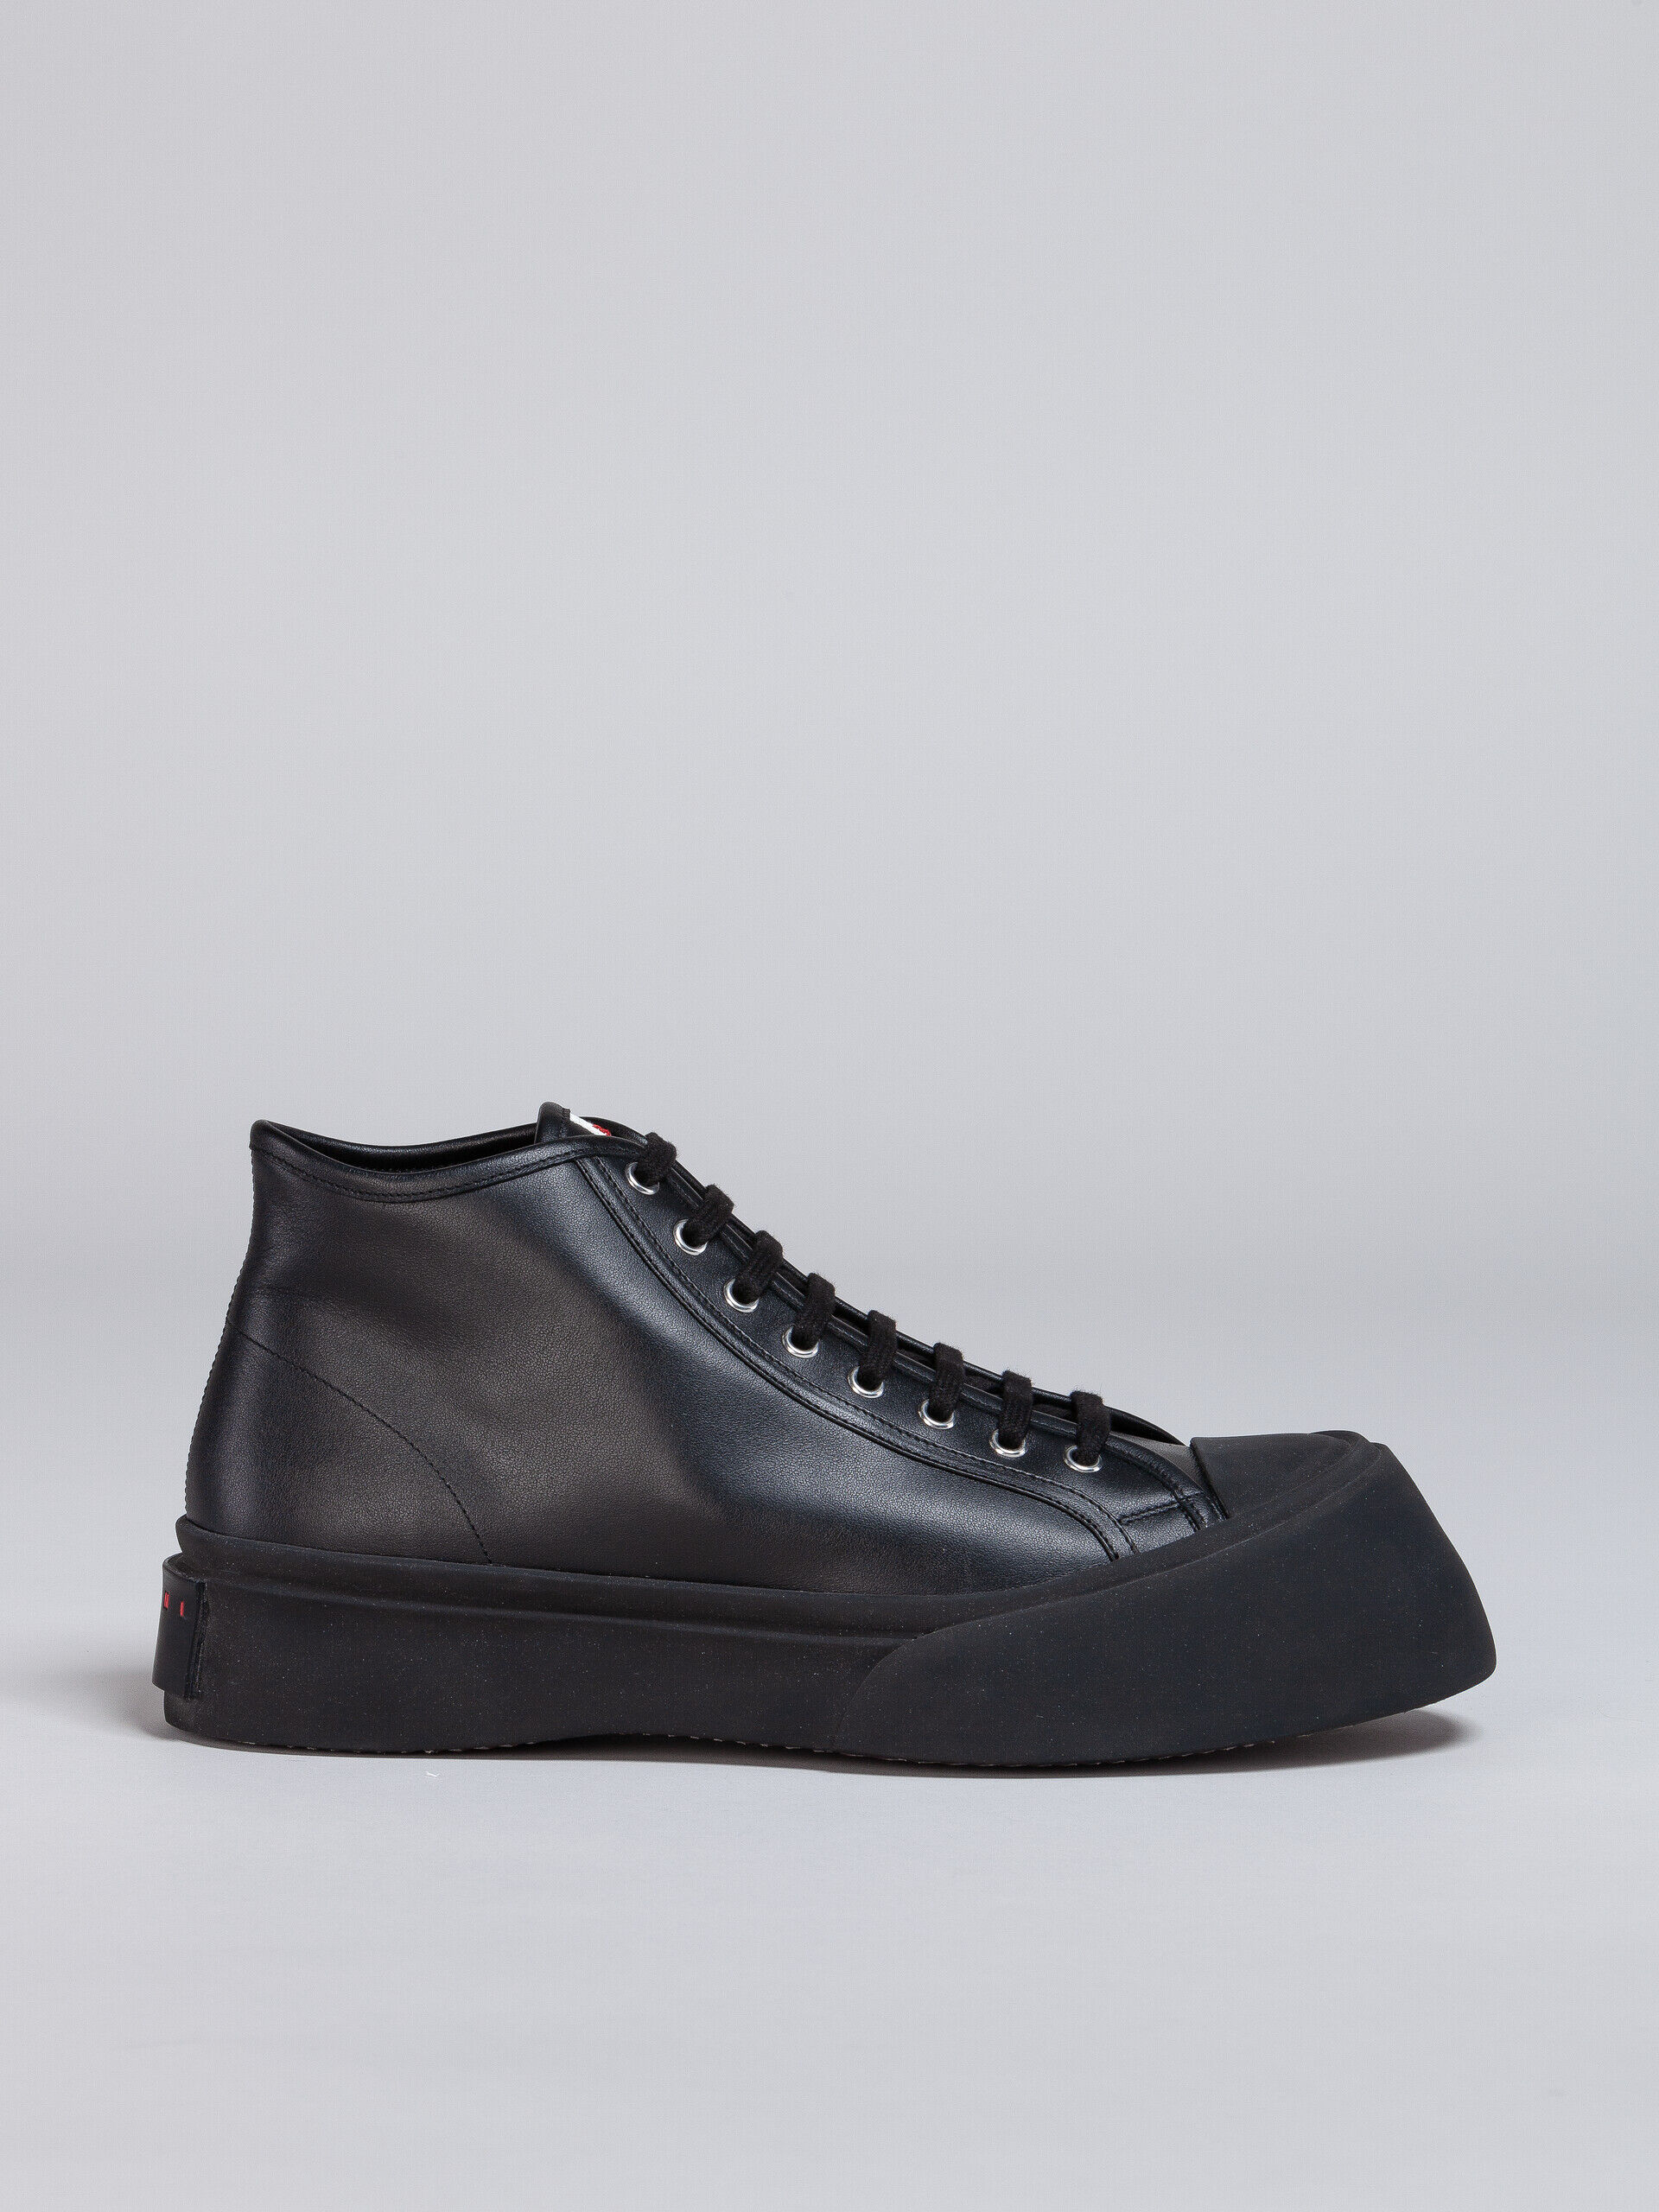 Black leather PABLO high top sneaker